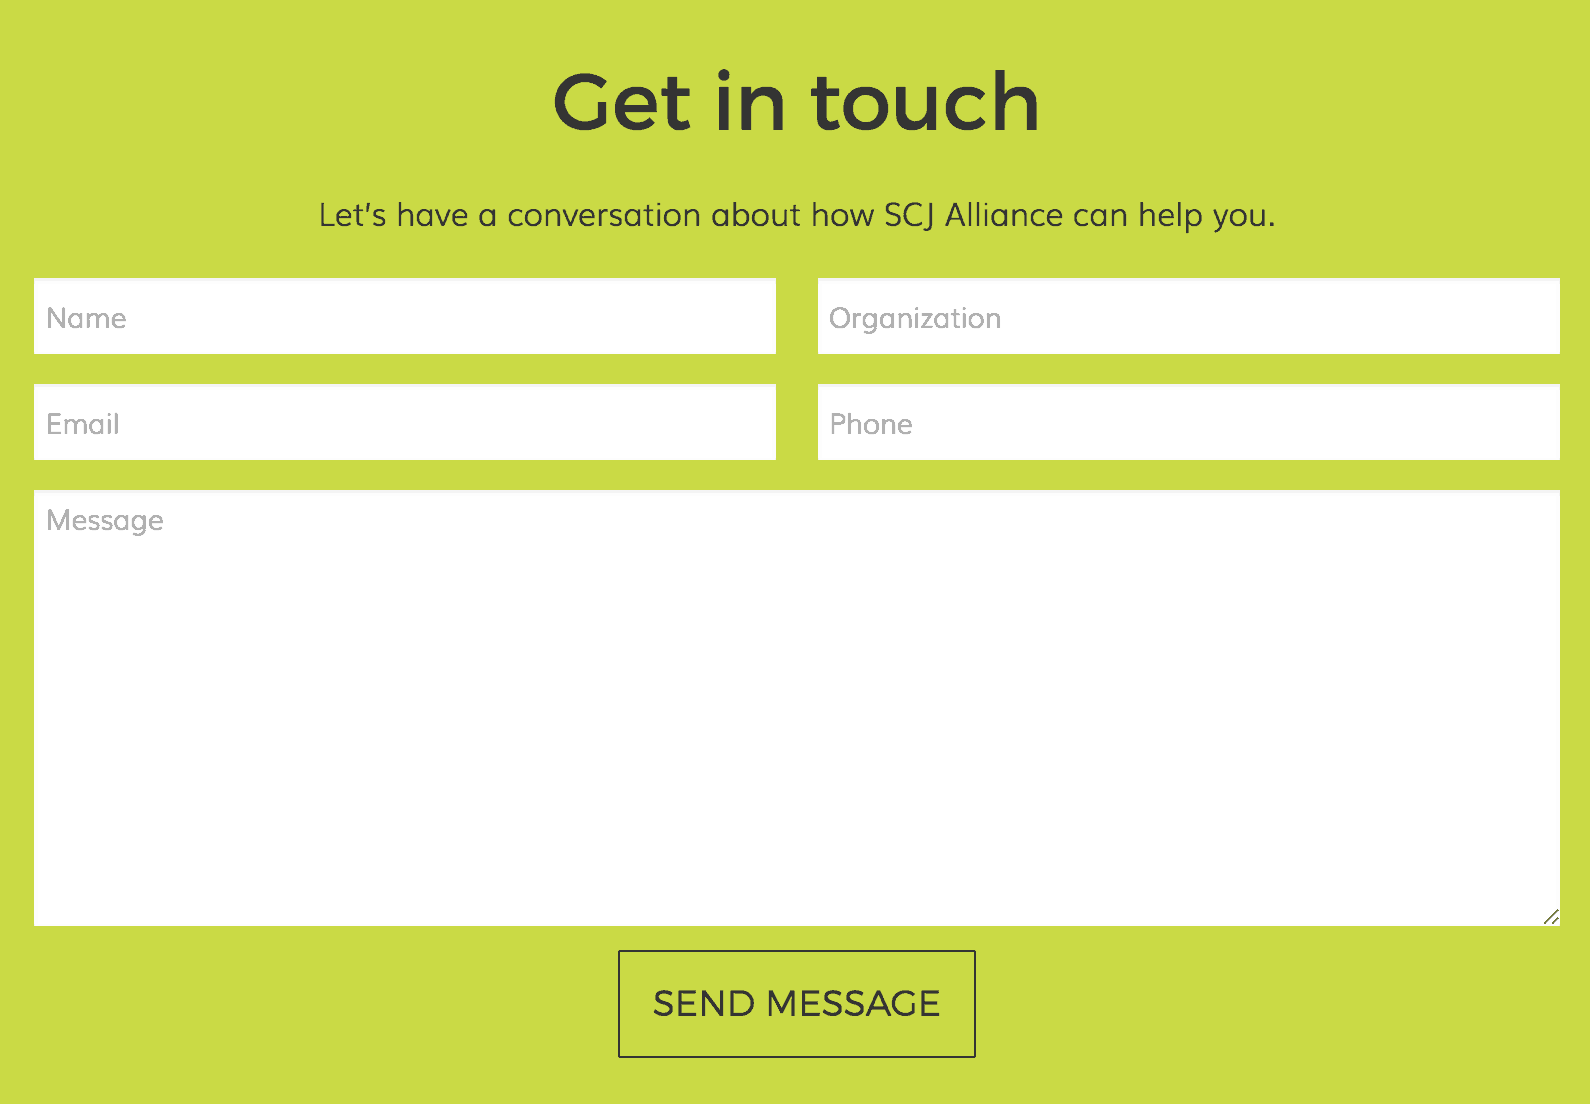 sample contact form